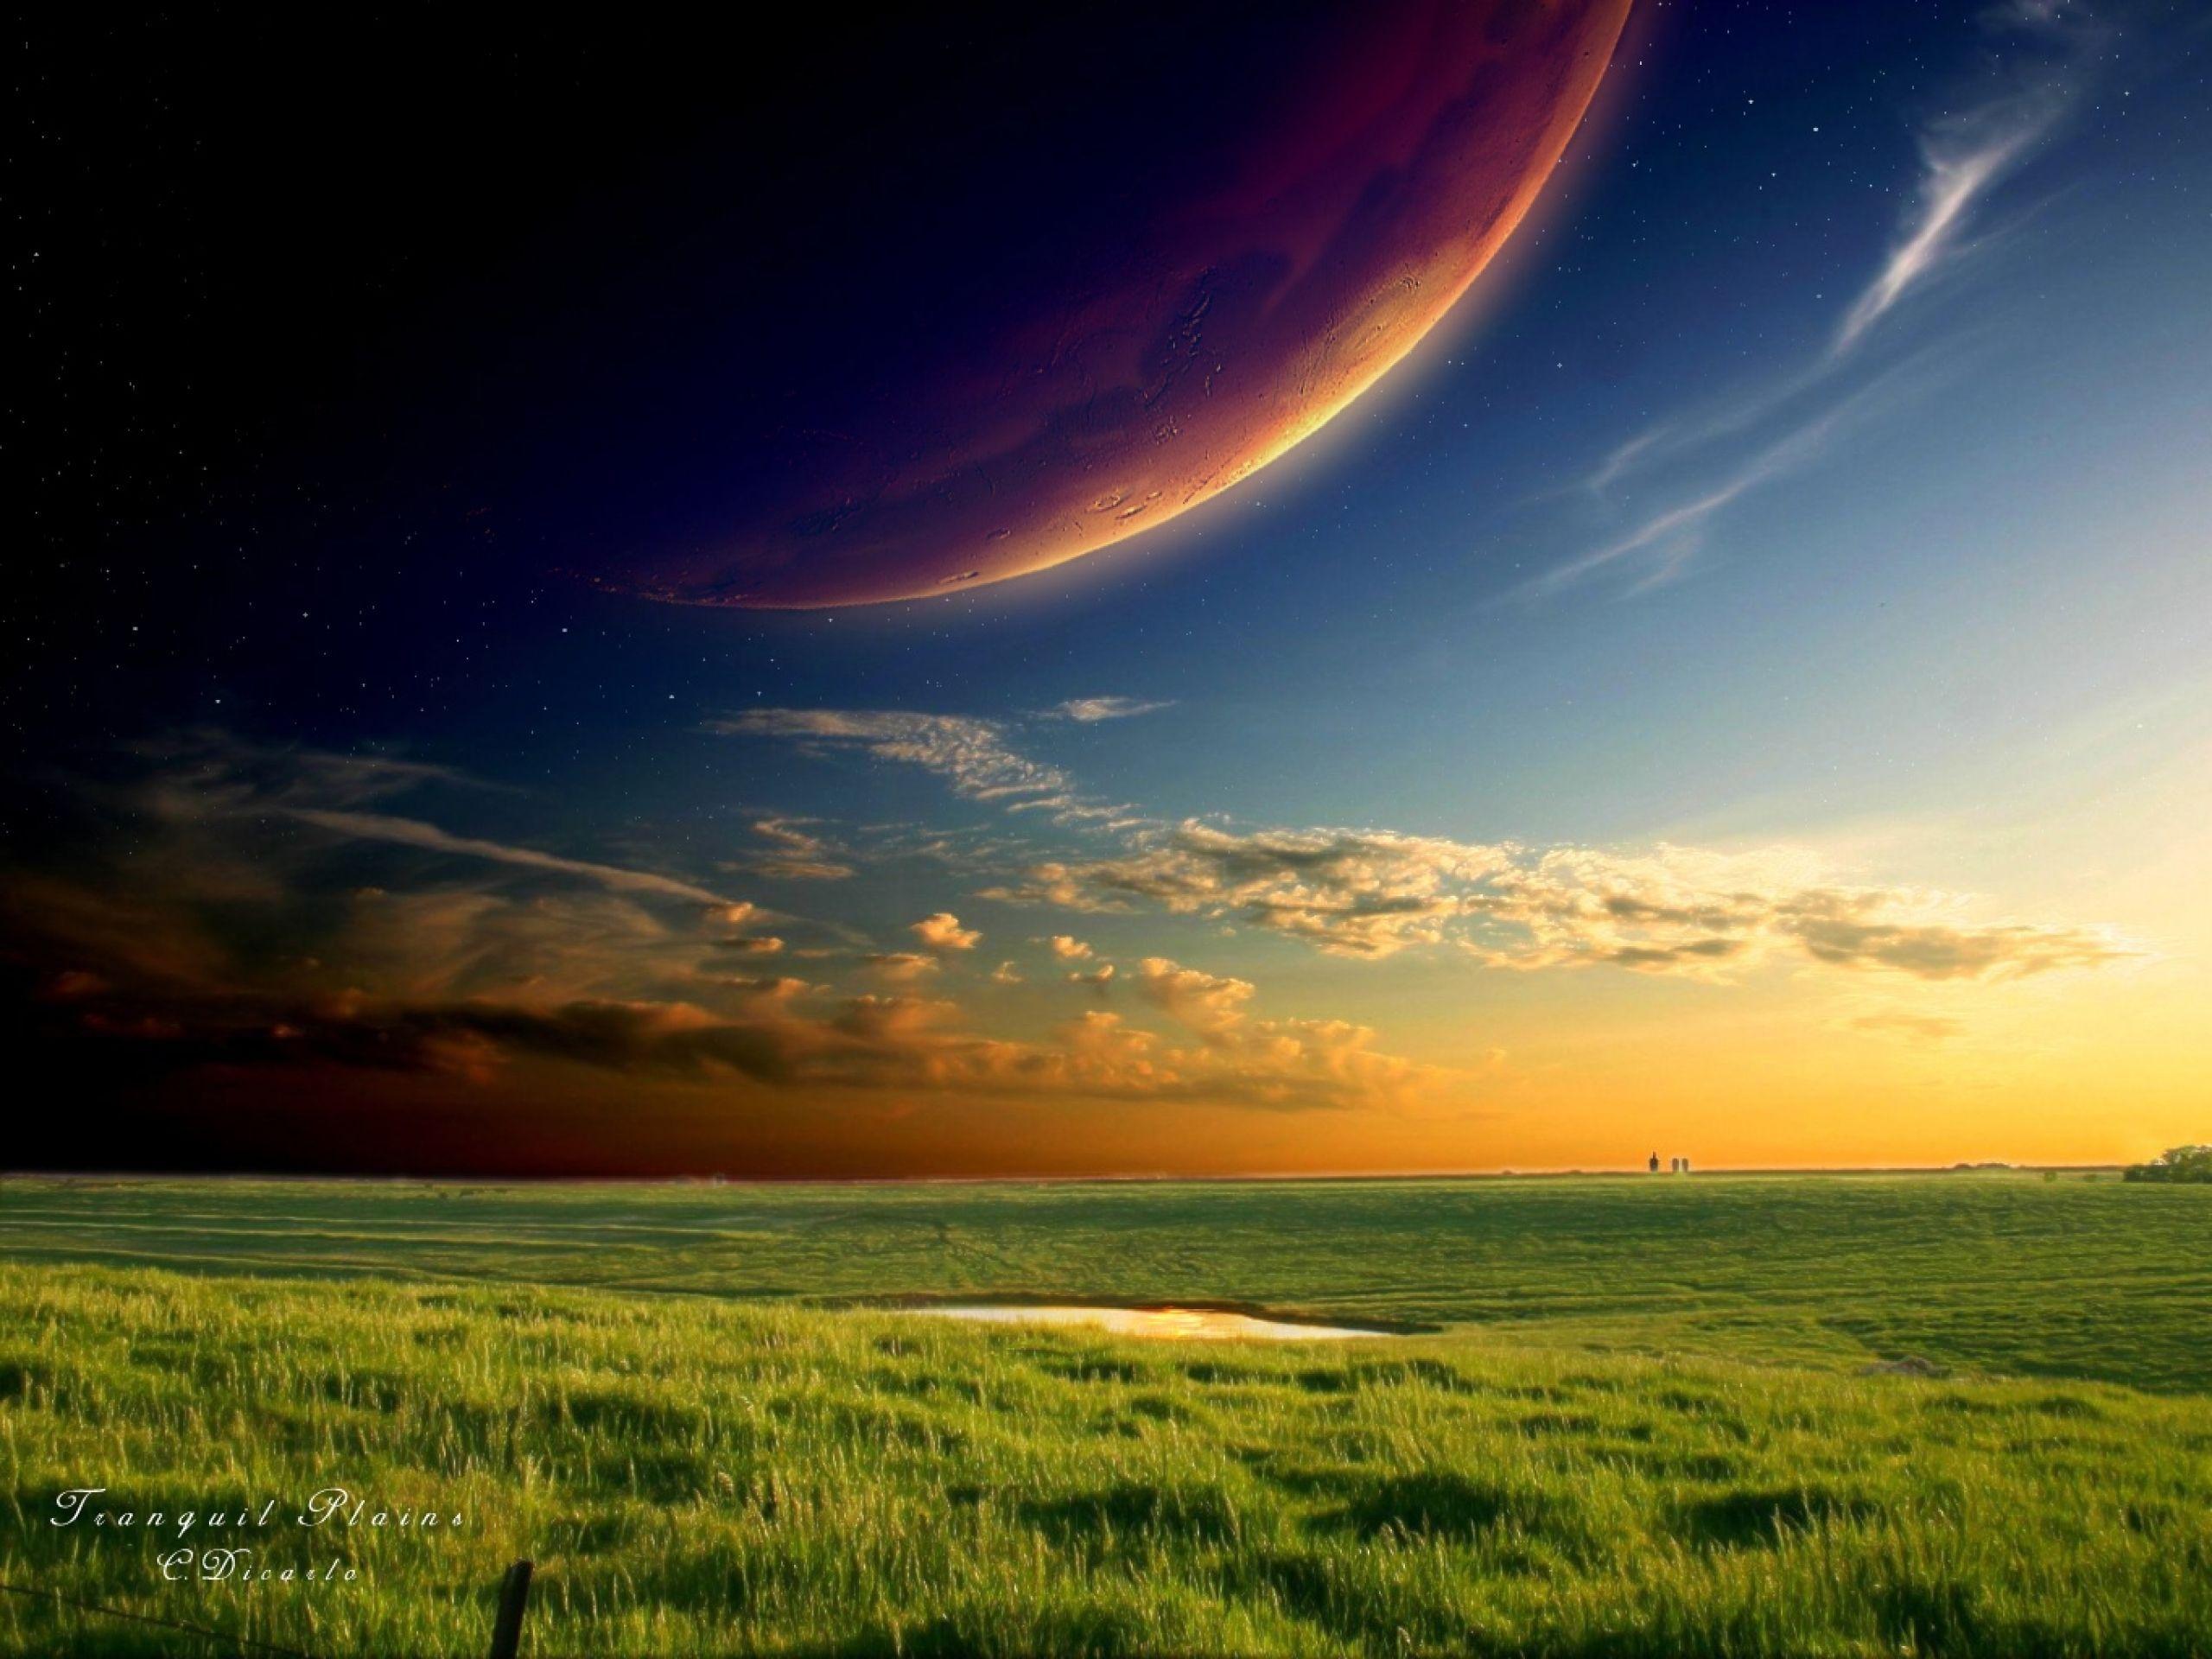 Tranquil Plains & Planet wallpapers